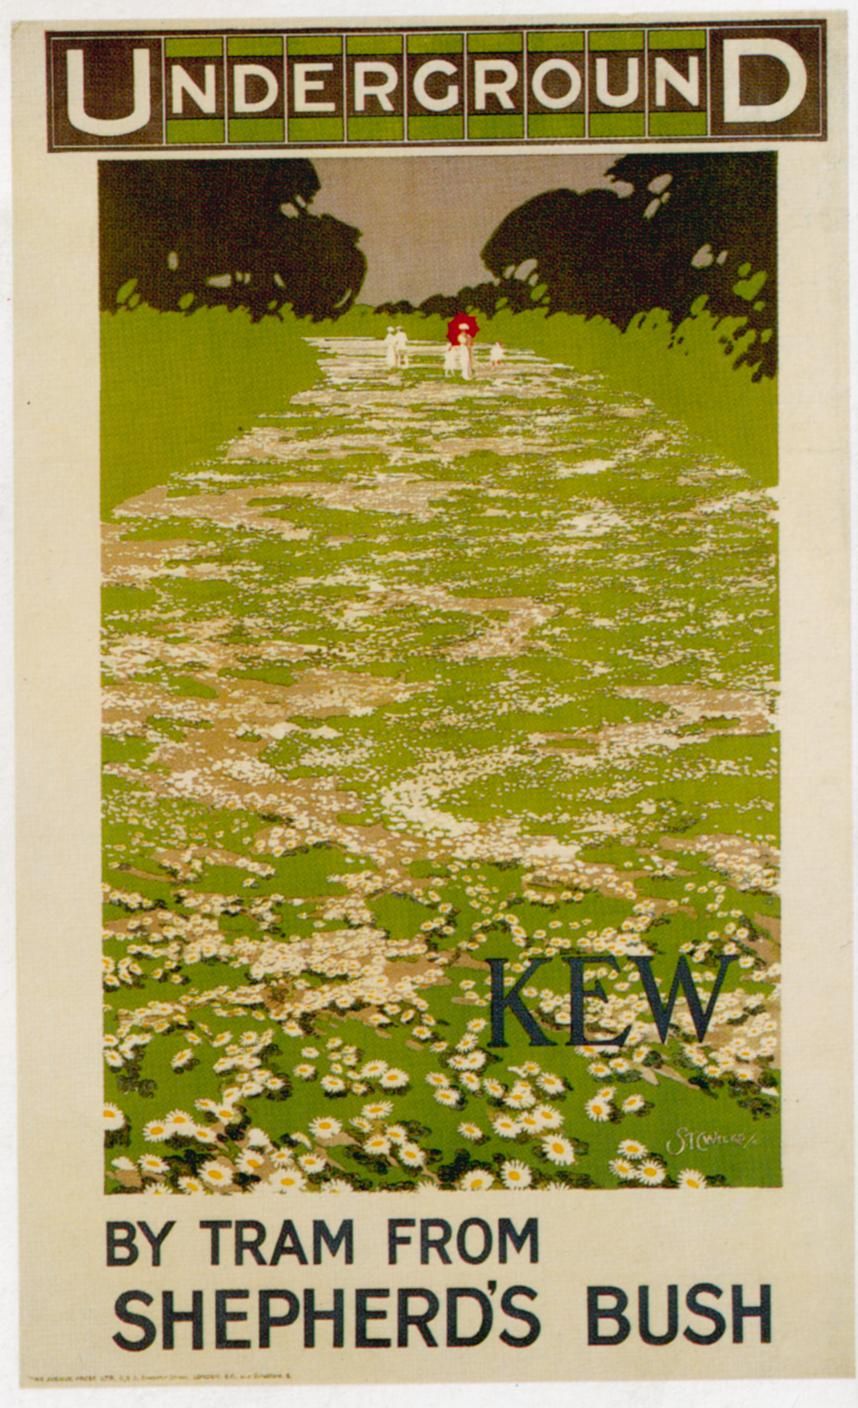 illustrational poster of two people walking a flowered path